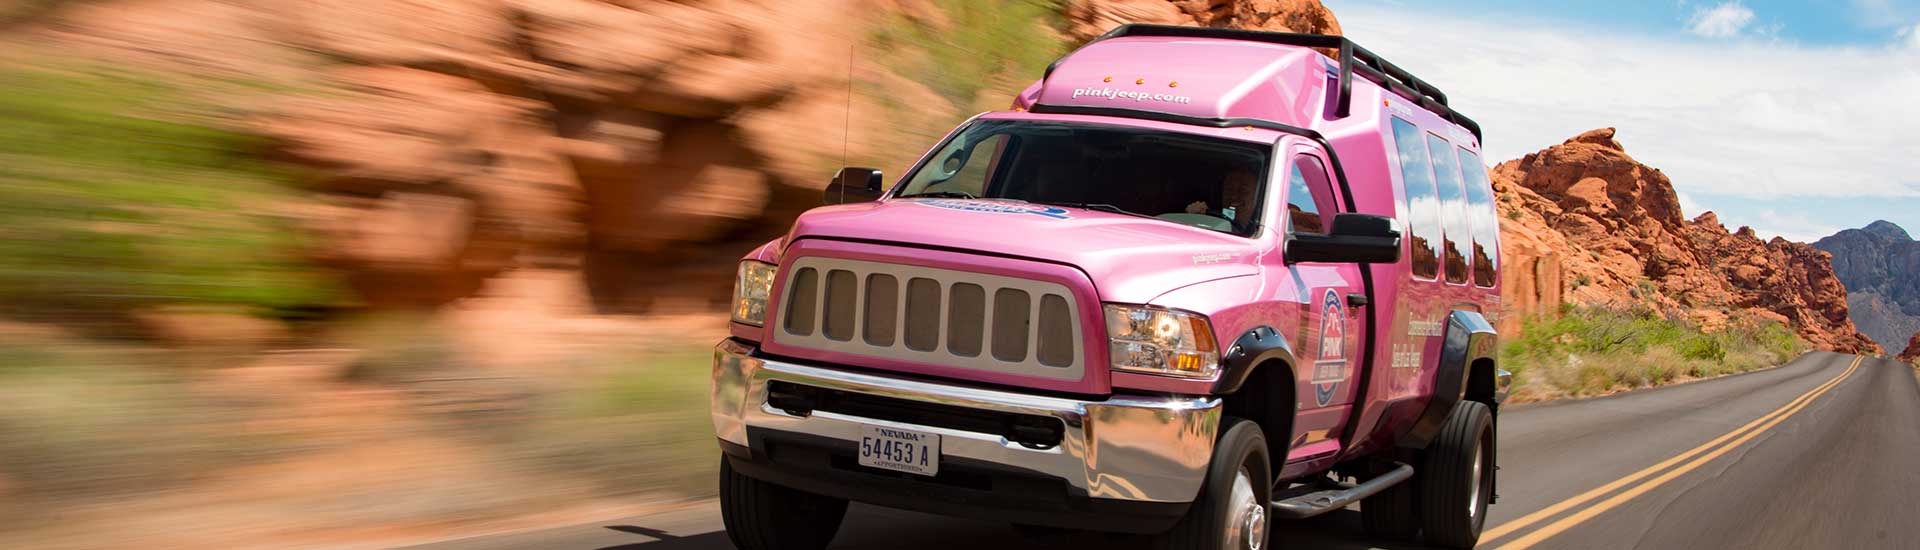 Motion image of Pink Jeep Tour Trekker driving through Valley of Fire State Park, Nevada.